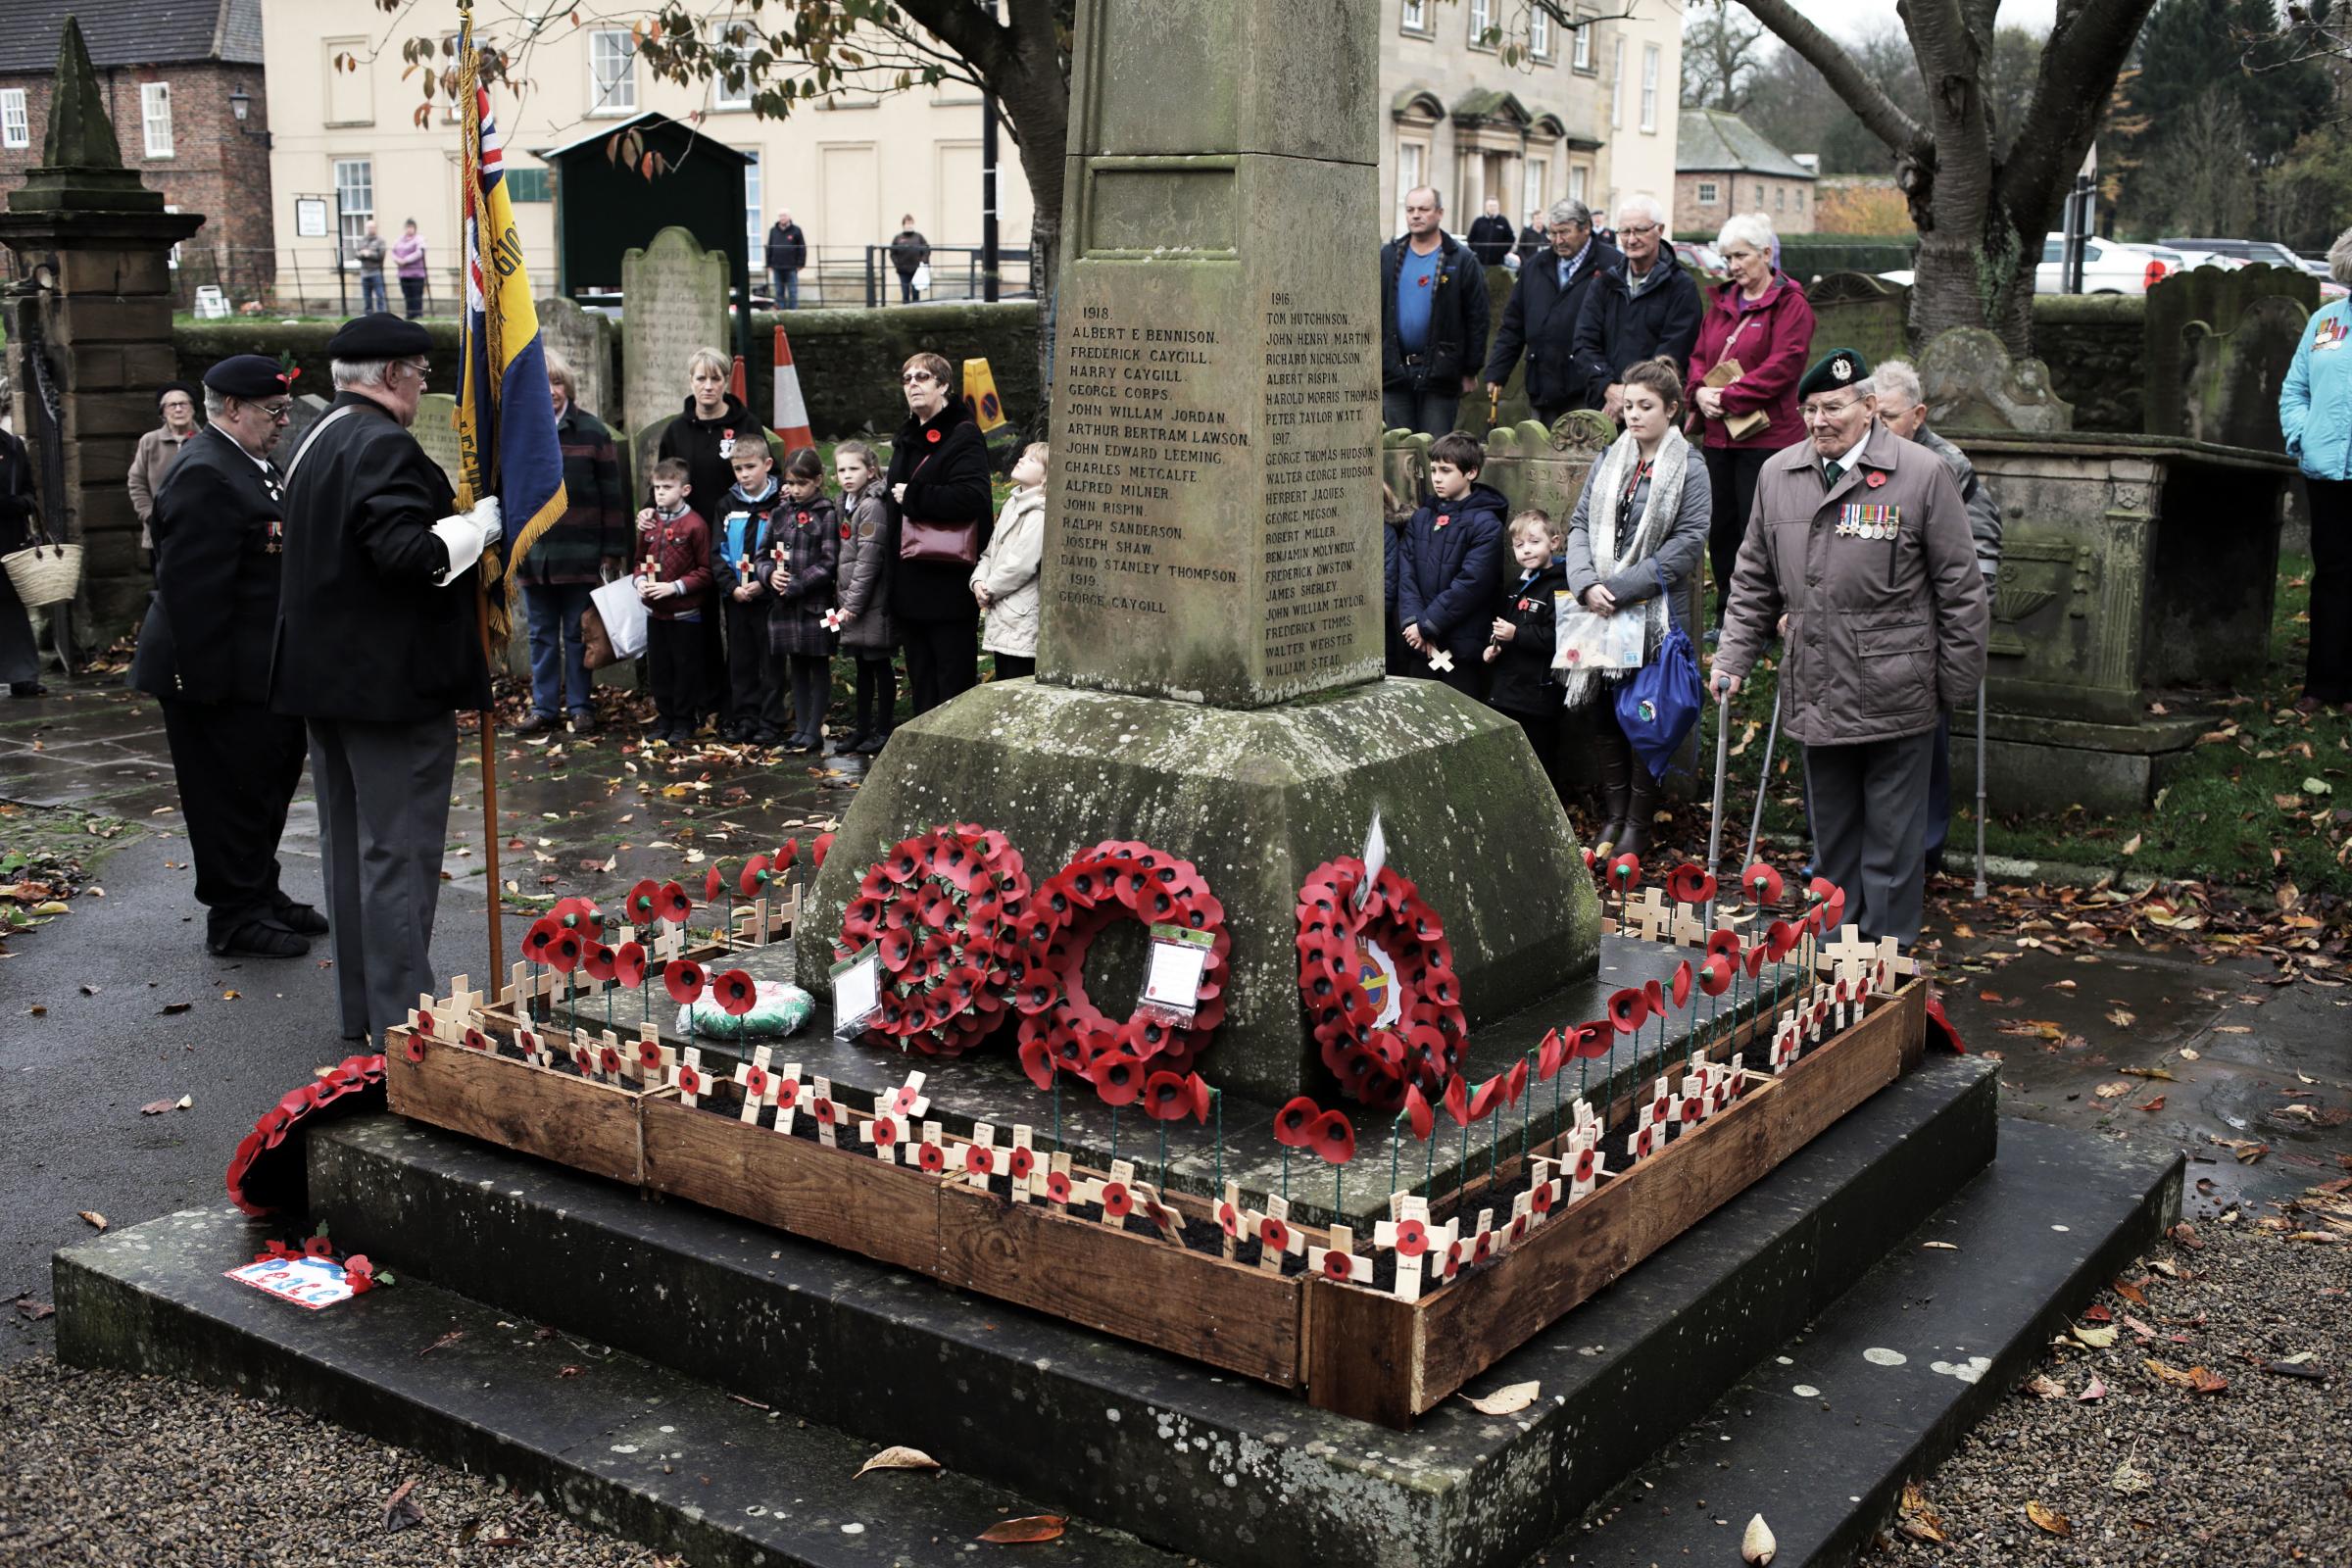 An Armistice Day service in 2014 around the Bedale war memorial in St Gregorys churchyard, which includes the name of Capt James Sherley